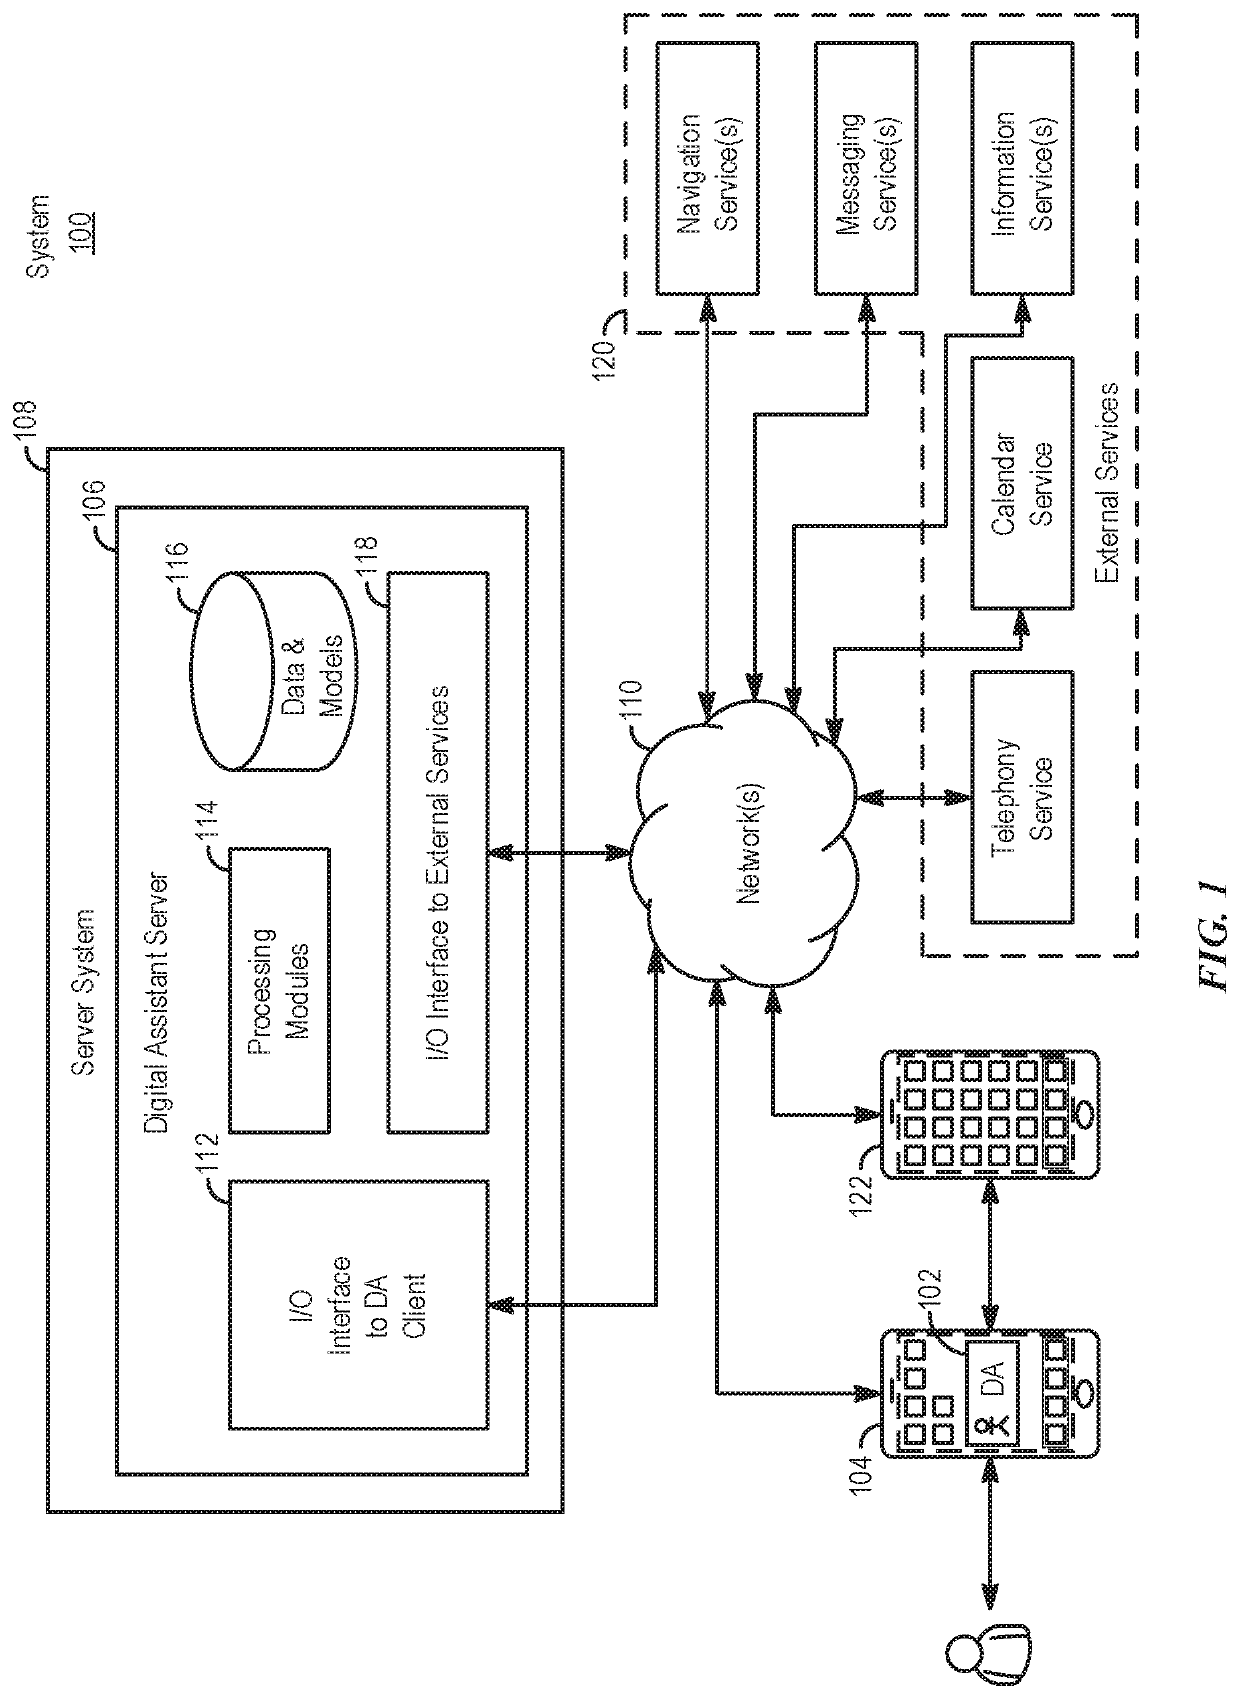 Virtual assistant operation in multi-device environments